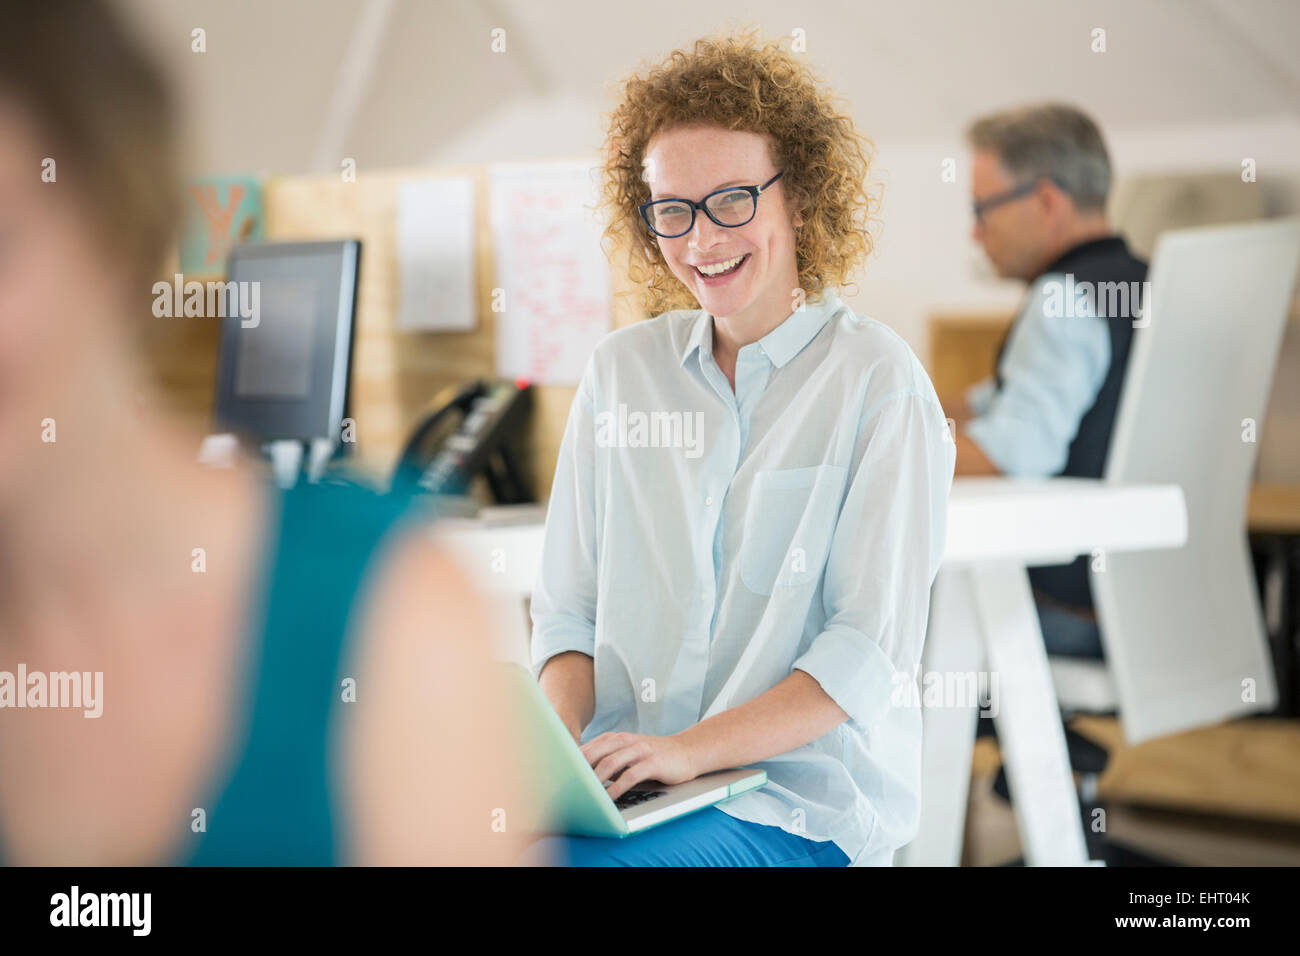 Portrait of woman using laptop and laughing, man working in background Stock Photo